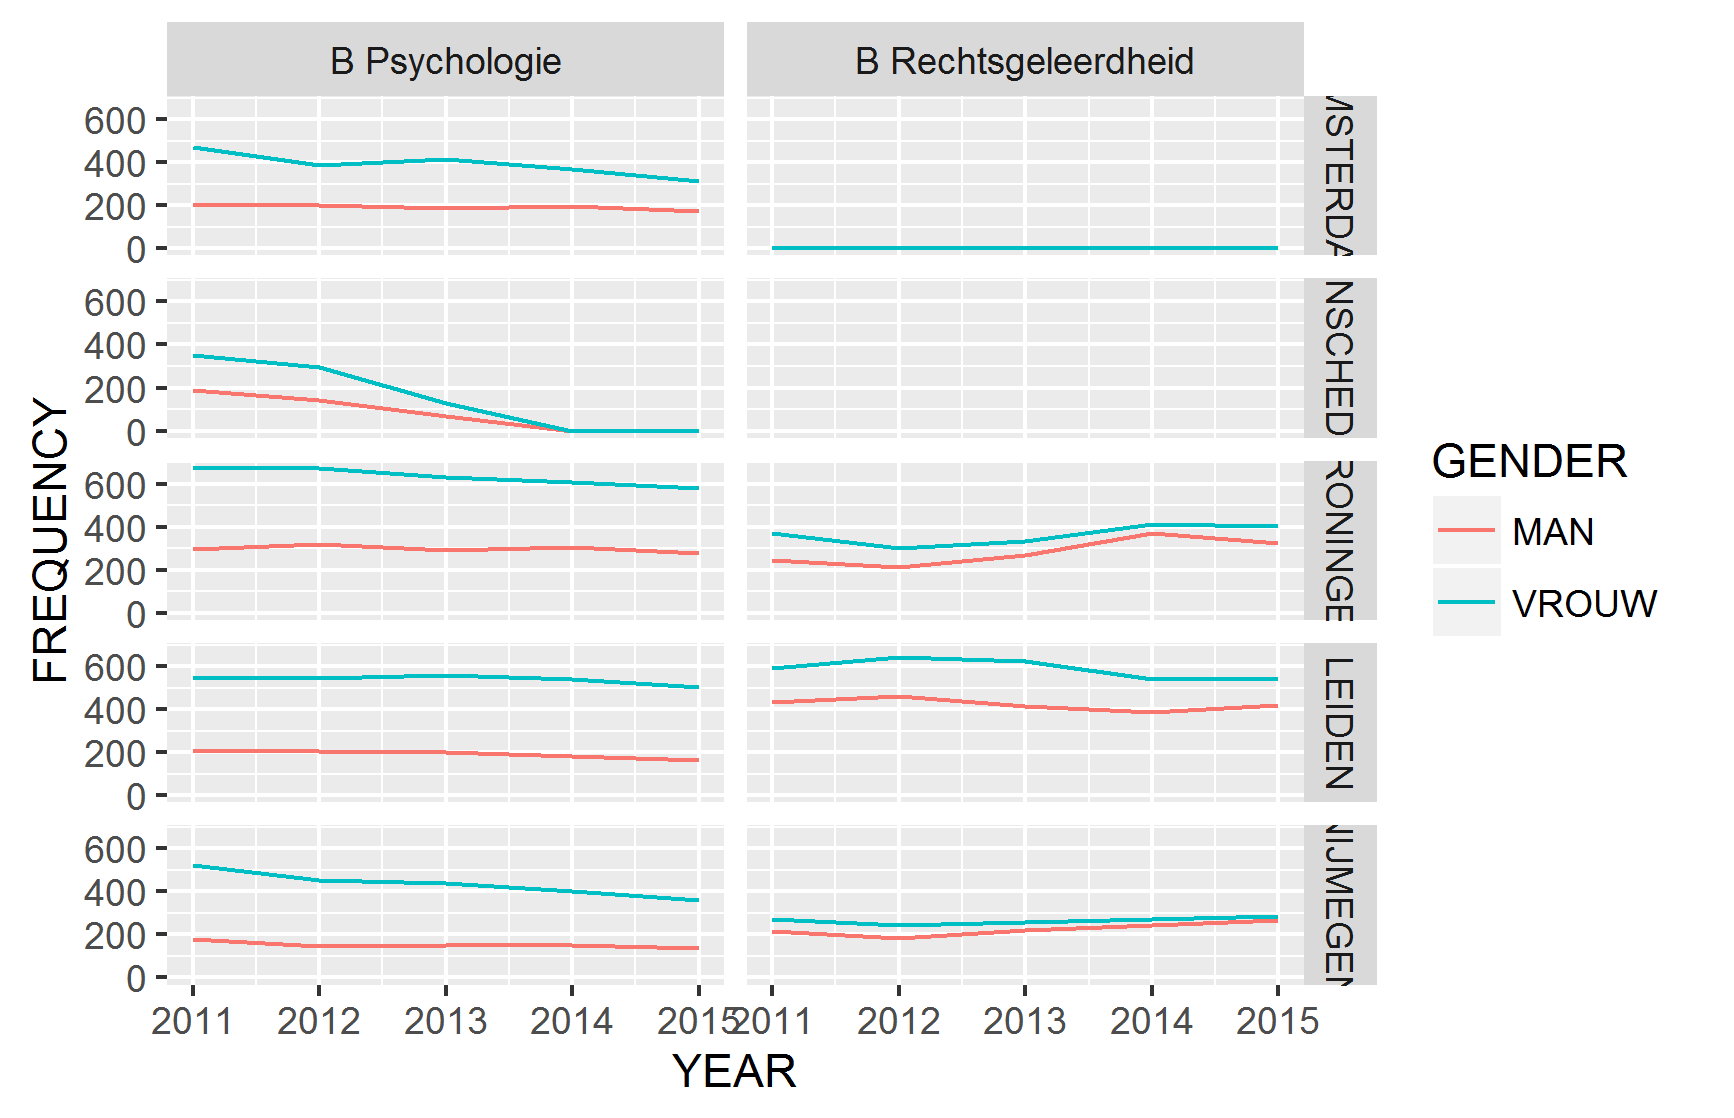 first plot of Psychology and Law in different cities by gender over time